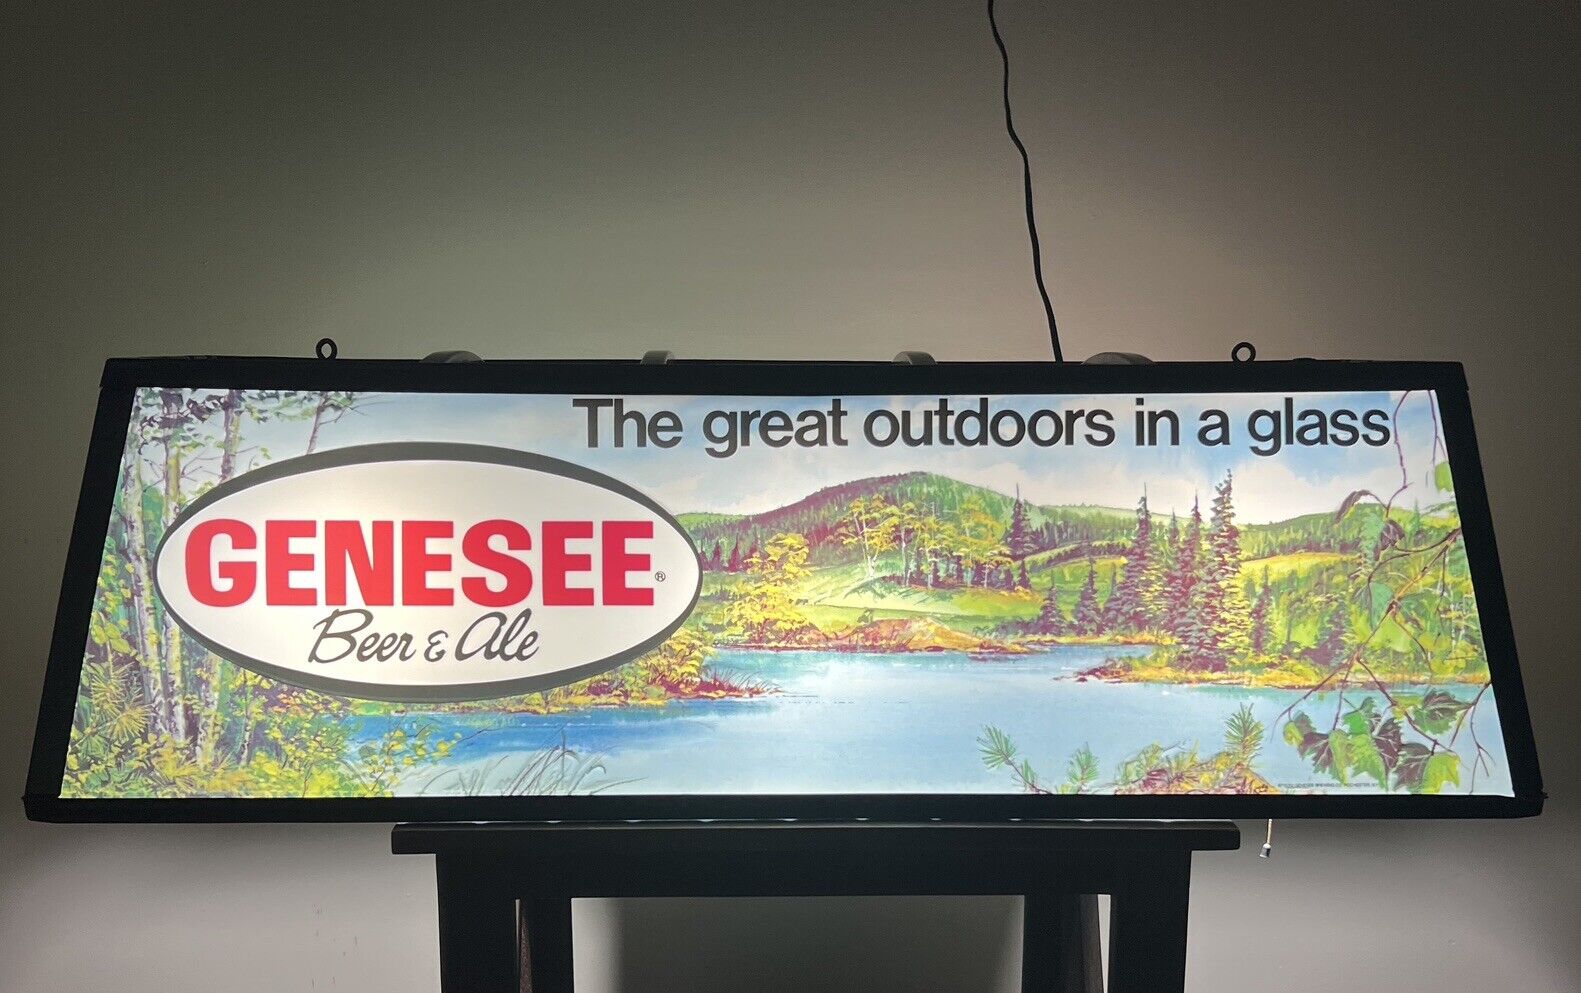 RARE Genesee Beer & Ale “The Great Outdoors In A Glass” Pool Table Hanging Light